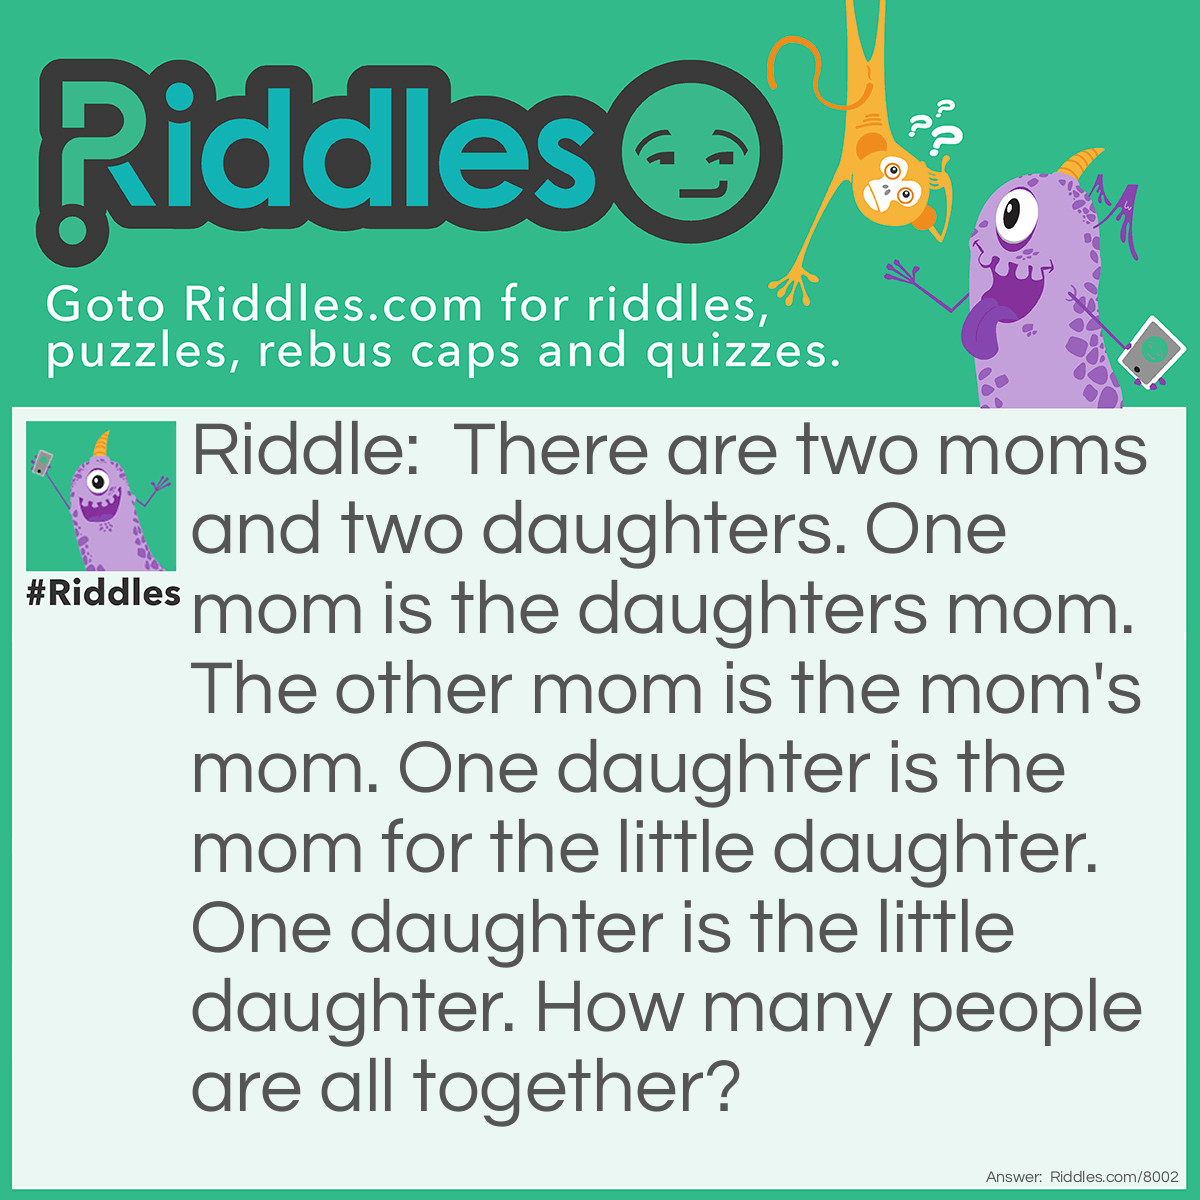 Riddle: There are two moms and two daughters. One mom is the daughters mom. The other mom is the mom's mom. One daughter is the mom for the little daughter. One daughter is the little daughter. How many people are all together? Answer: 3.